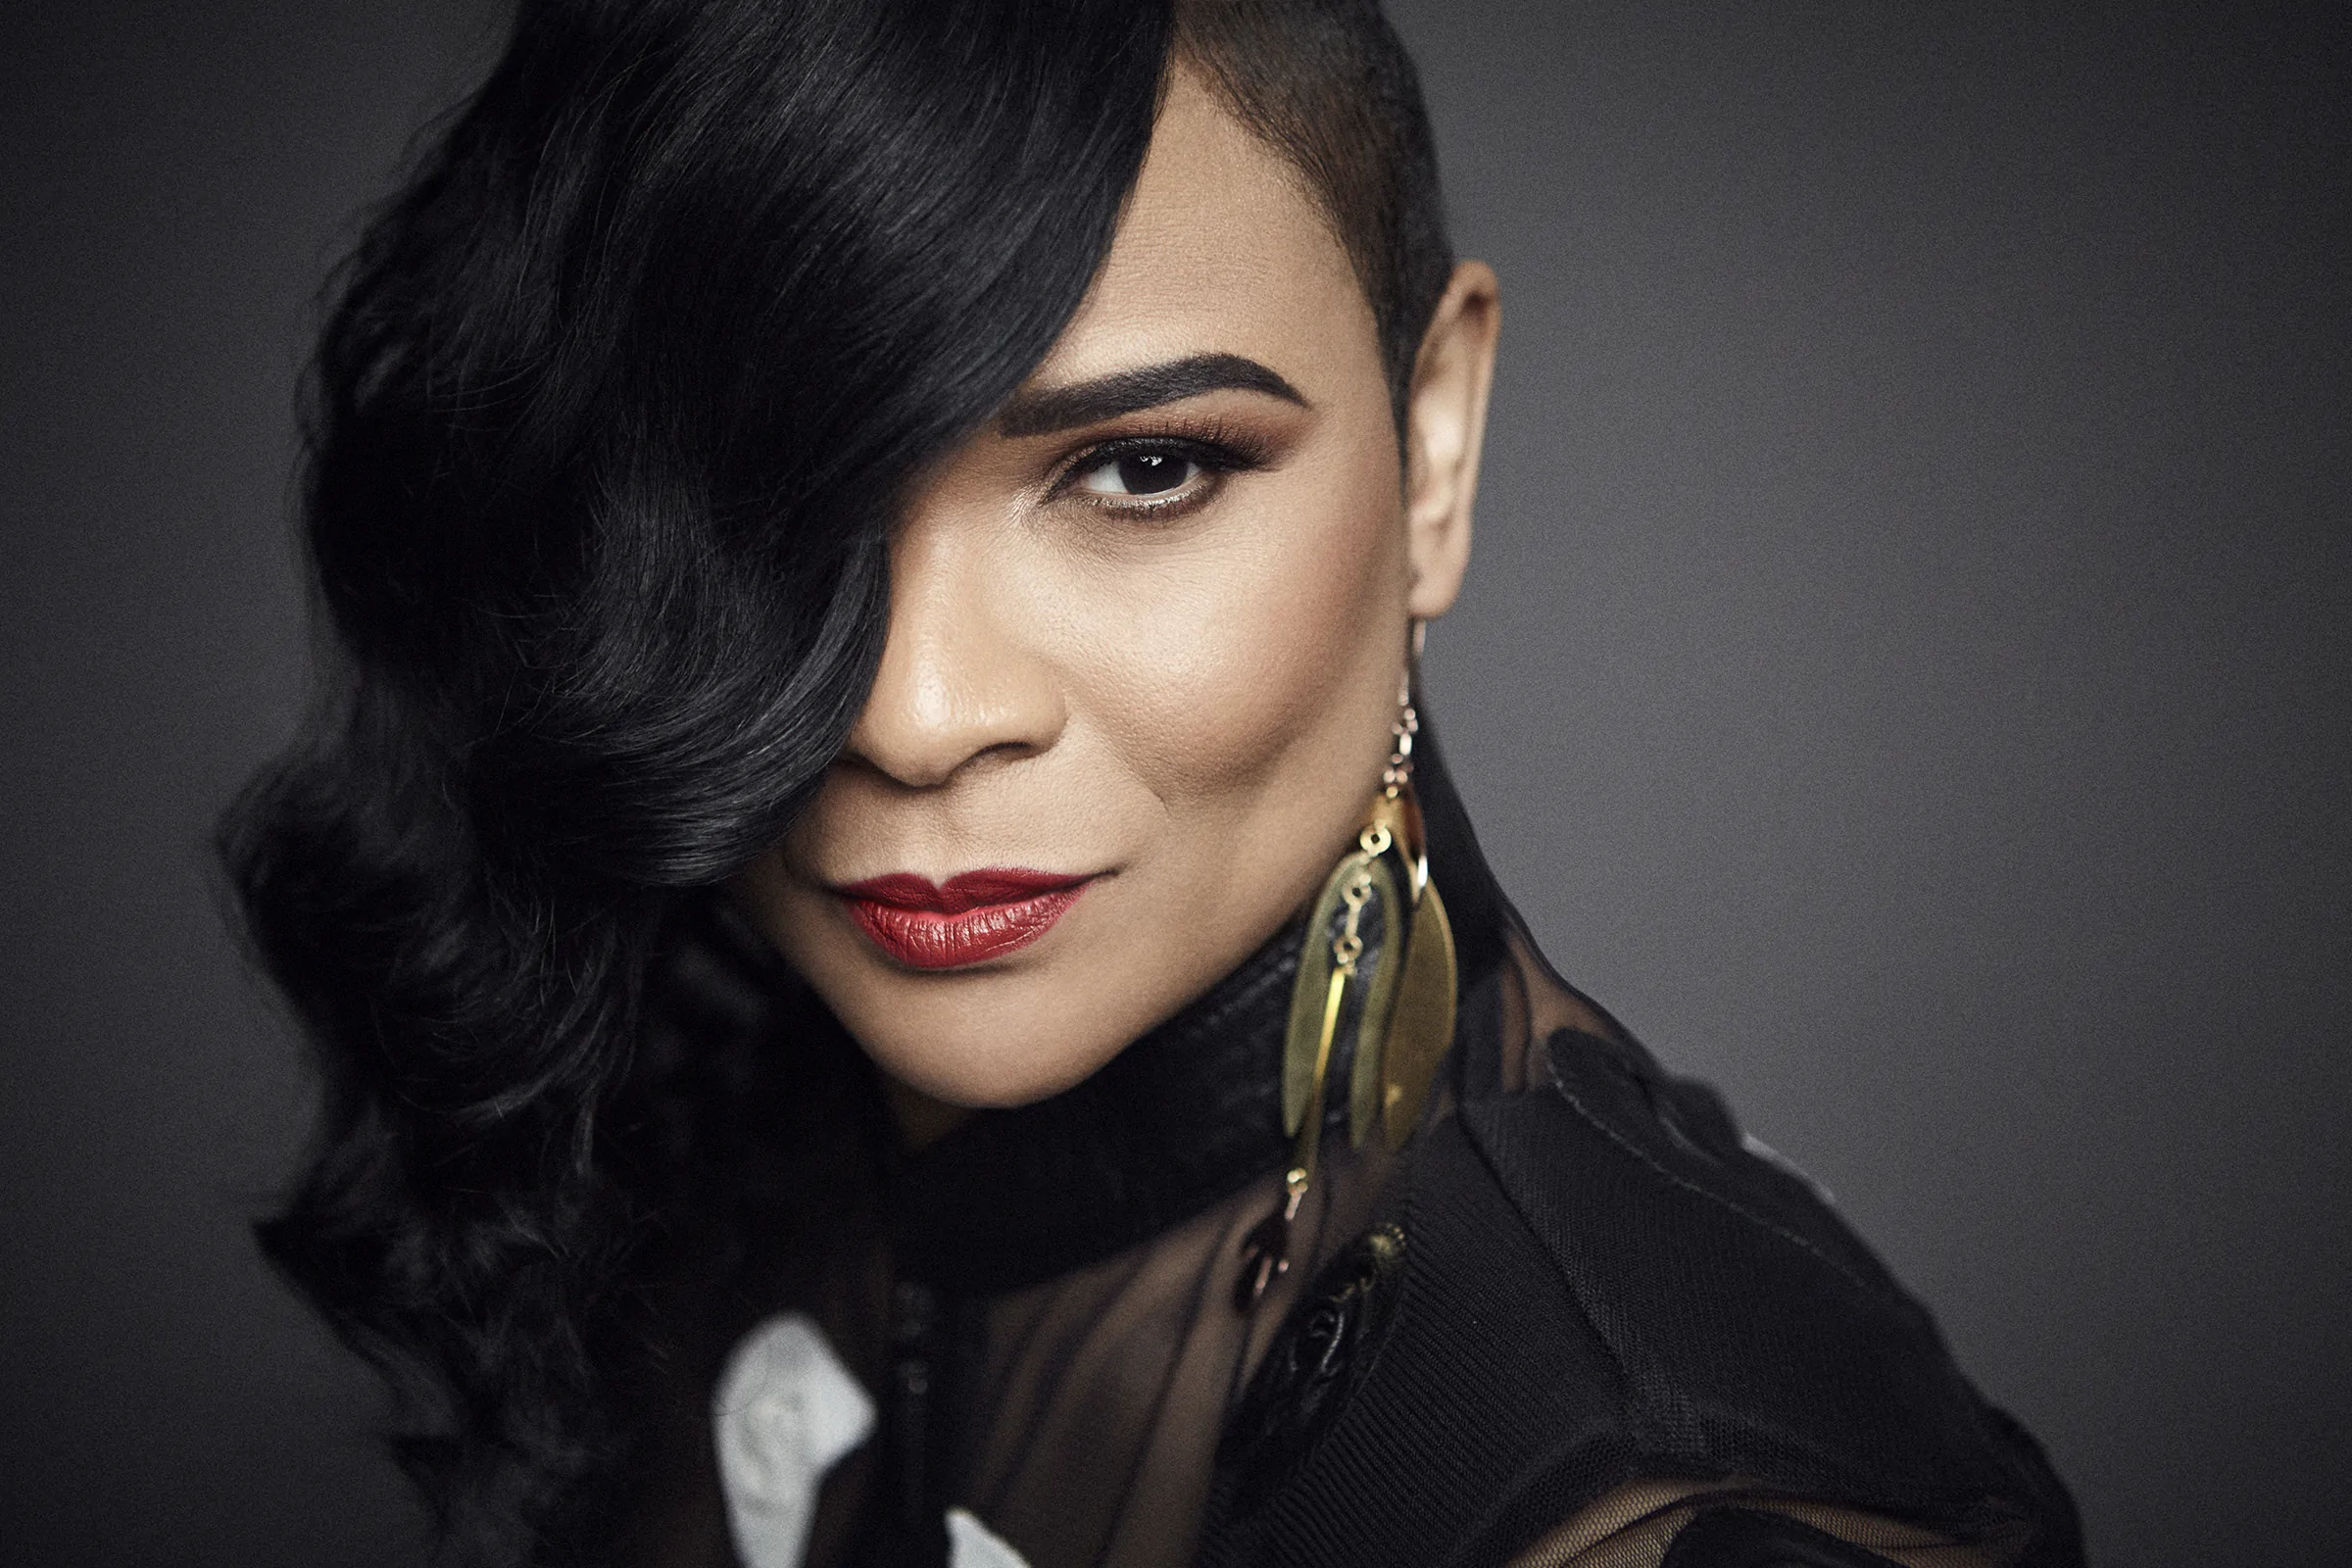 GABRIELLE announces summer shows including dates with Culture Club